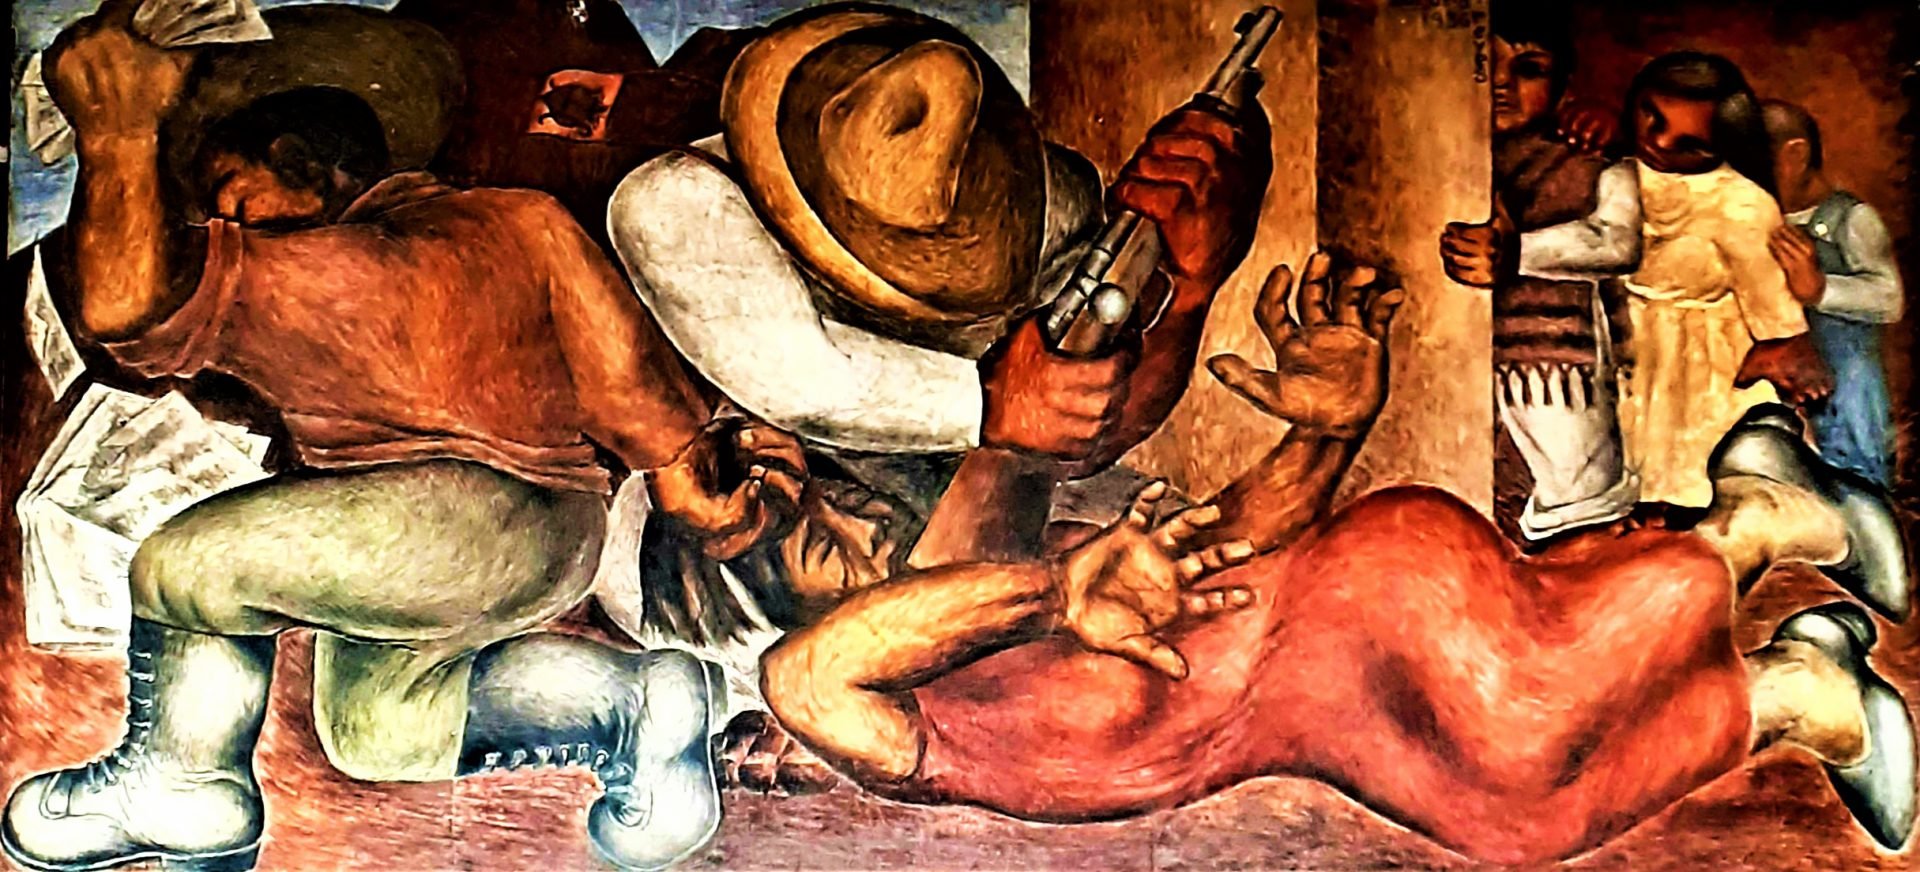 eyes’ painting depicts a violent attack on a rural teacher, inspired by a real incident in San Felipe Torres Mochas, Guanajuato. A female teacher is depicted being assaulted by a man who simultaneously destroys a book and holds money, while students watch. Symbols like a scapulary and money highlight violence's roots in religion and capitalism. Reyes, an activist and communist, critiques not just the individual aggressors but the broader socio-political system fueling such violence.